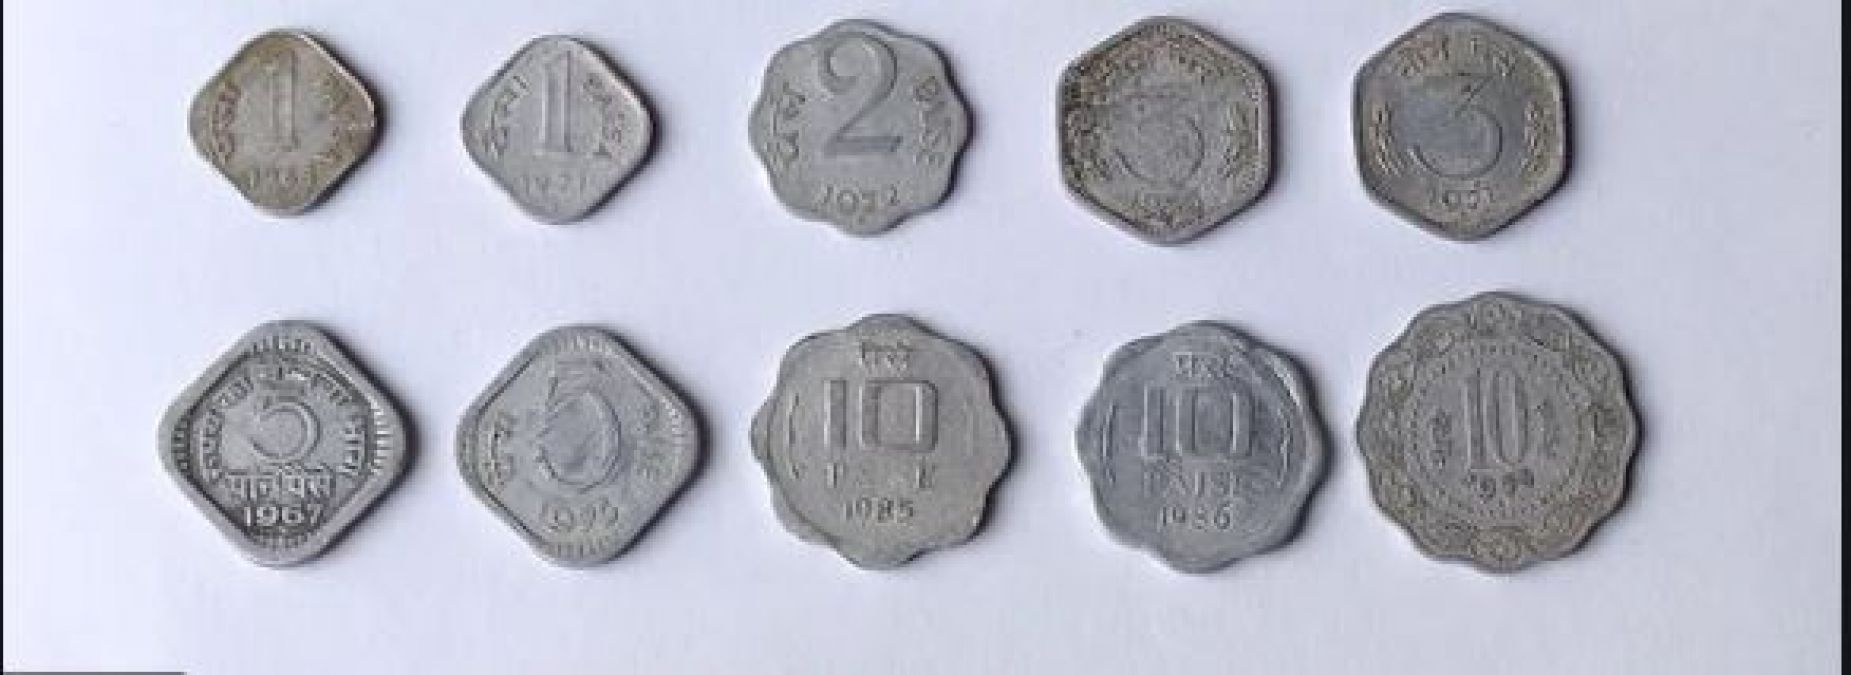 This 50 paise coin can make you a millionaire